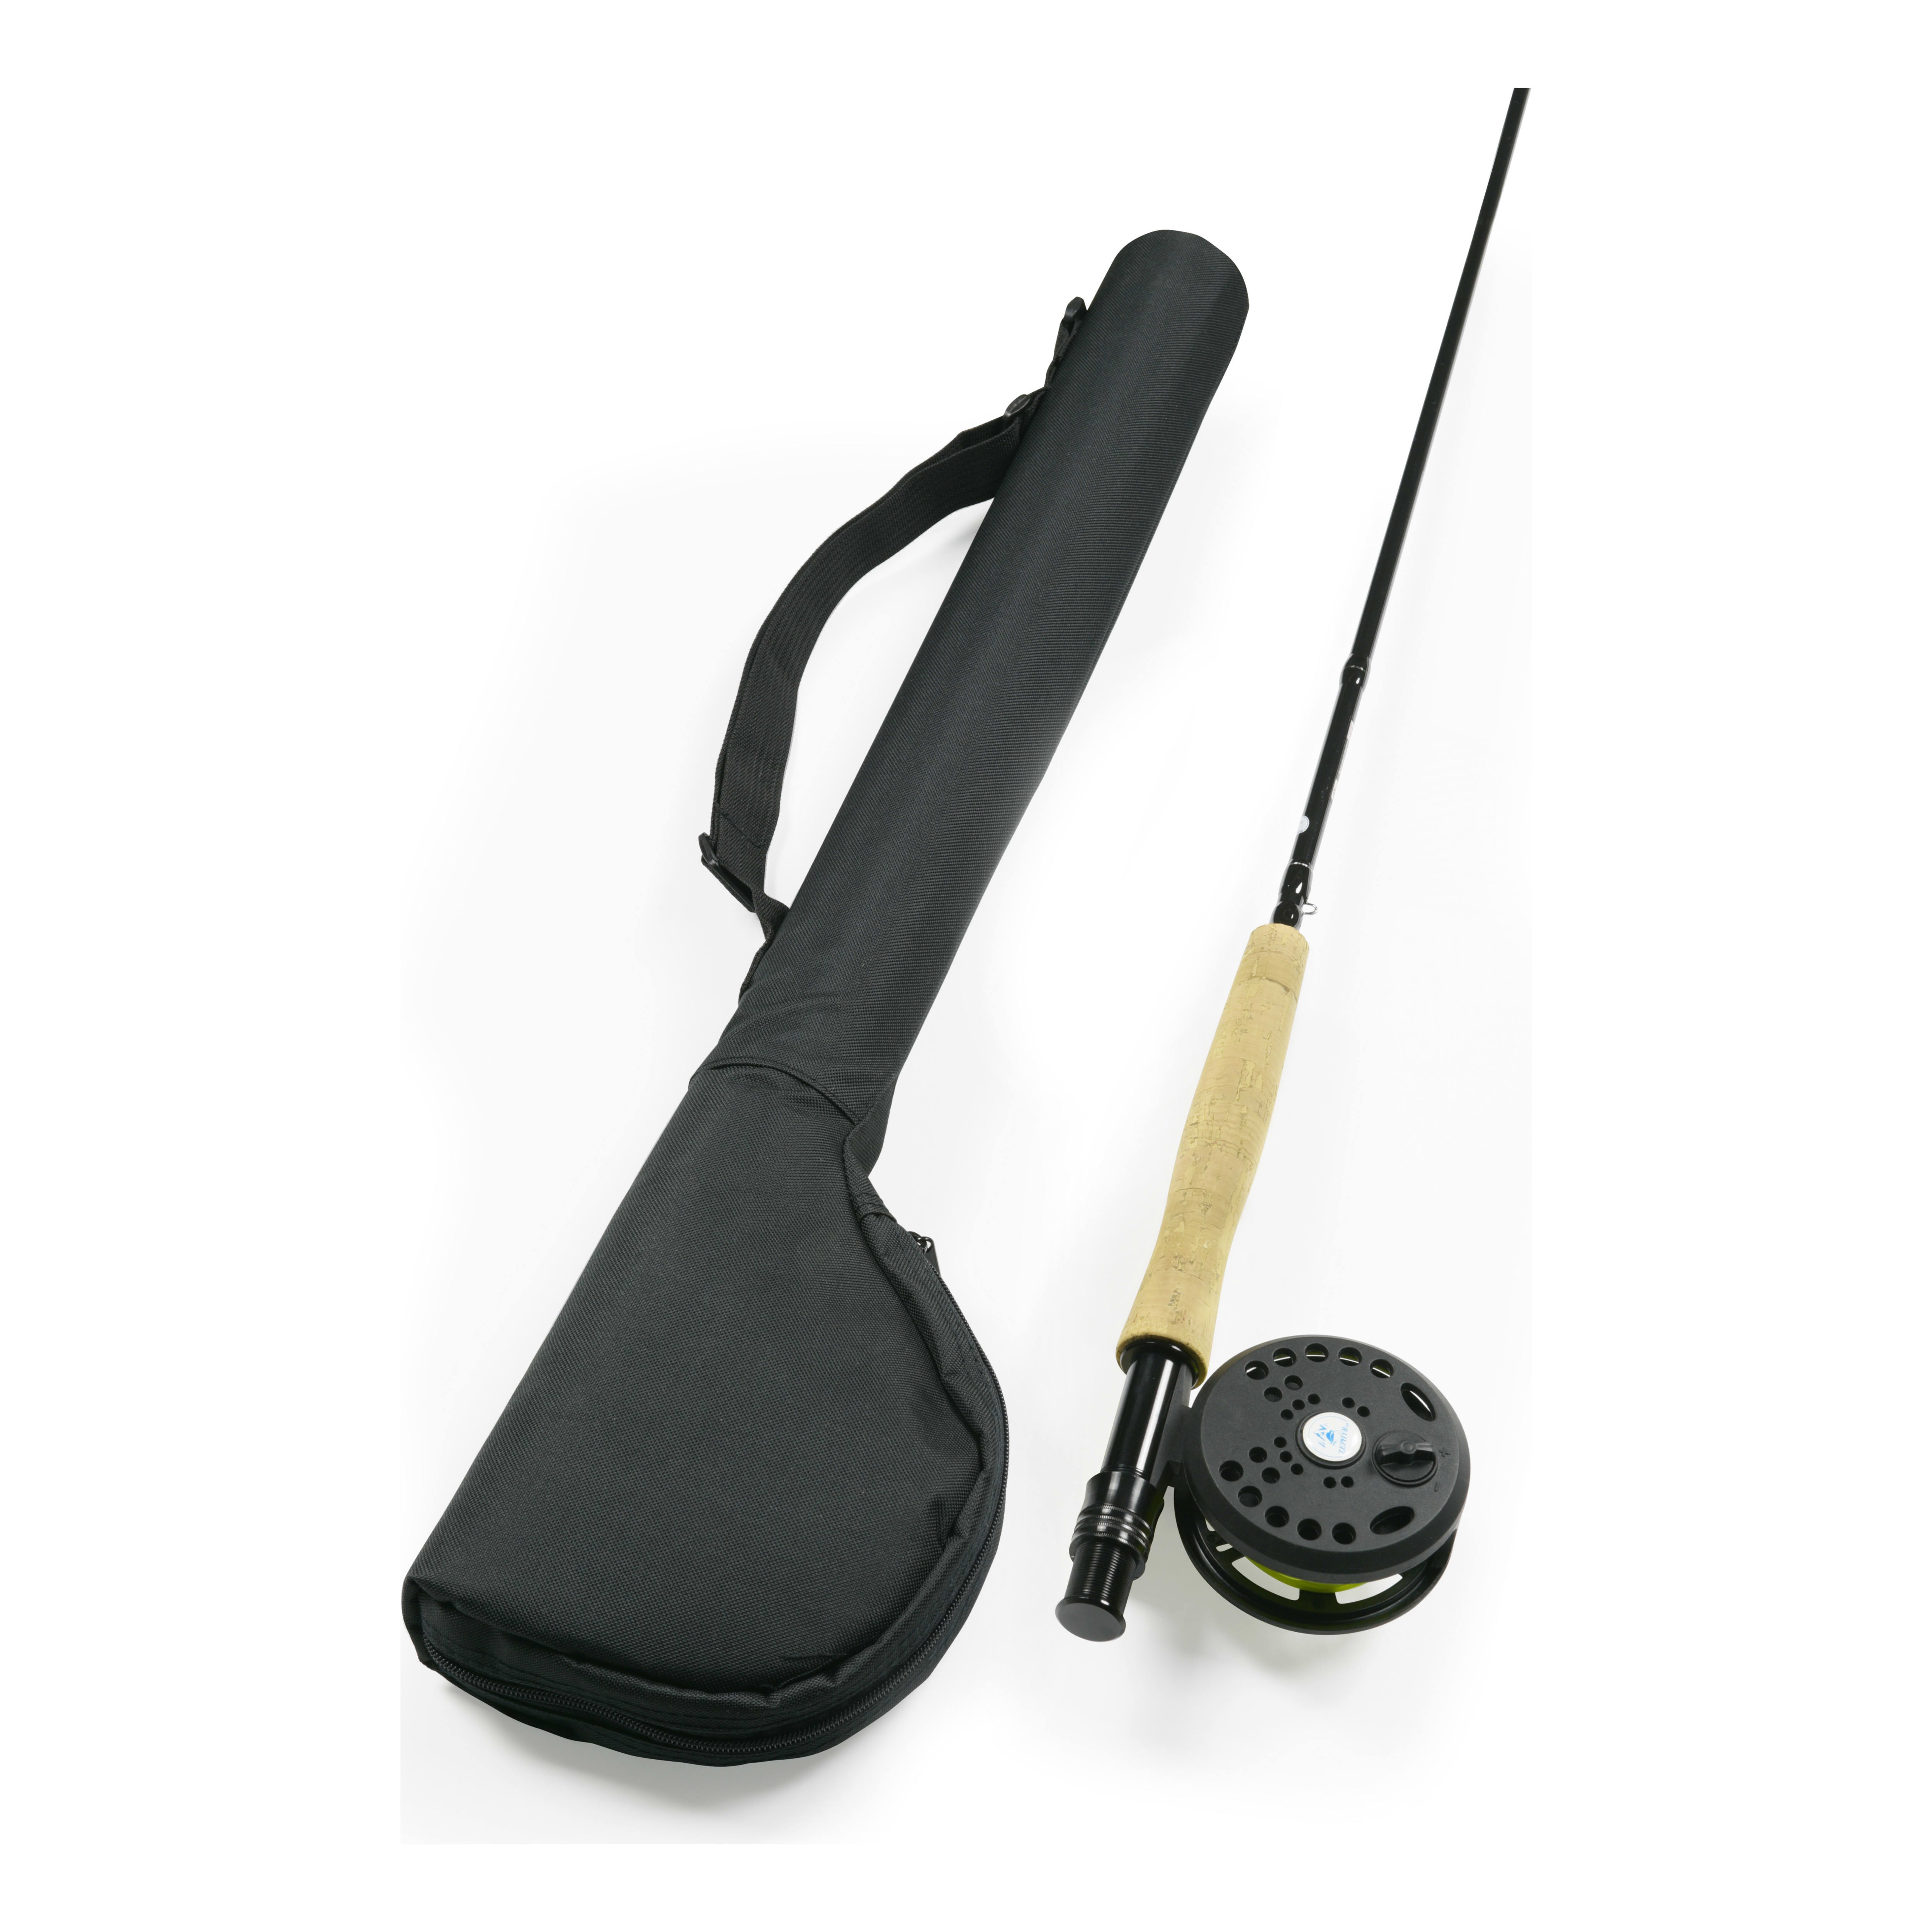 Zephyr Fly Fishing Outfit - Cabelas - ZEPHYR - Rod & Reel Combos